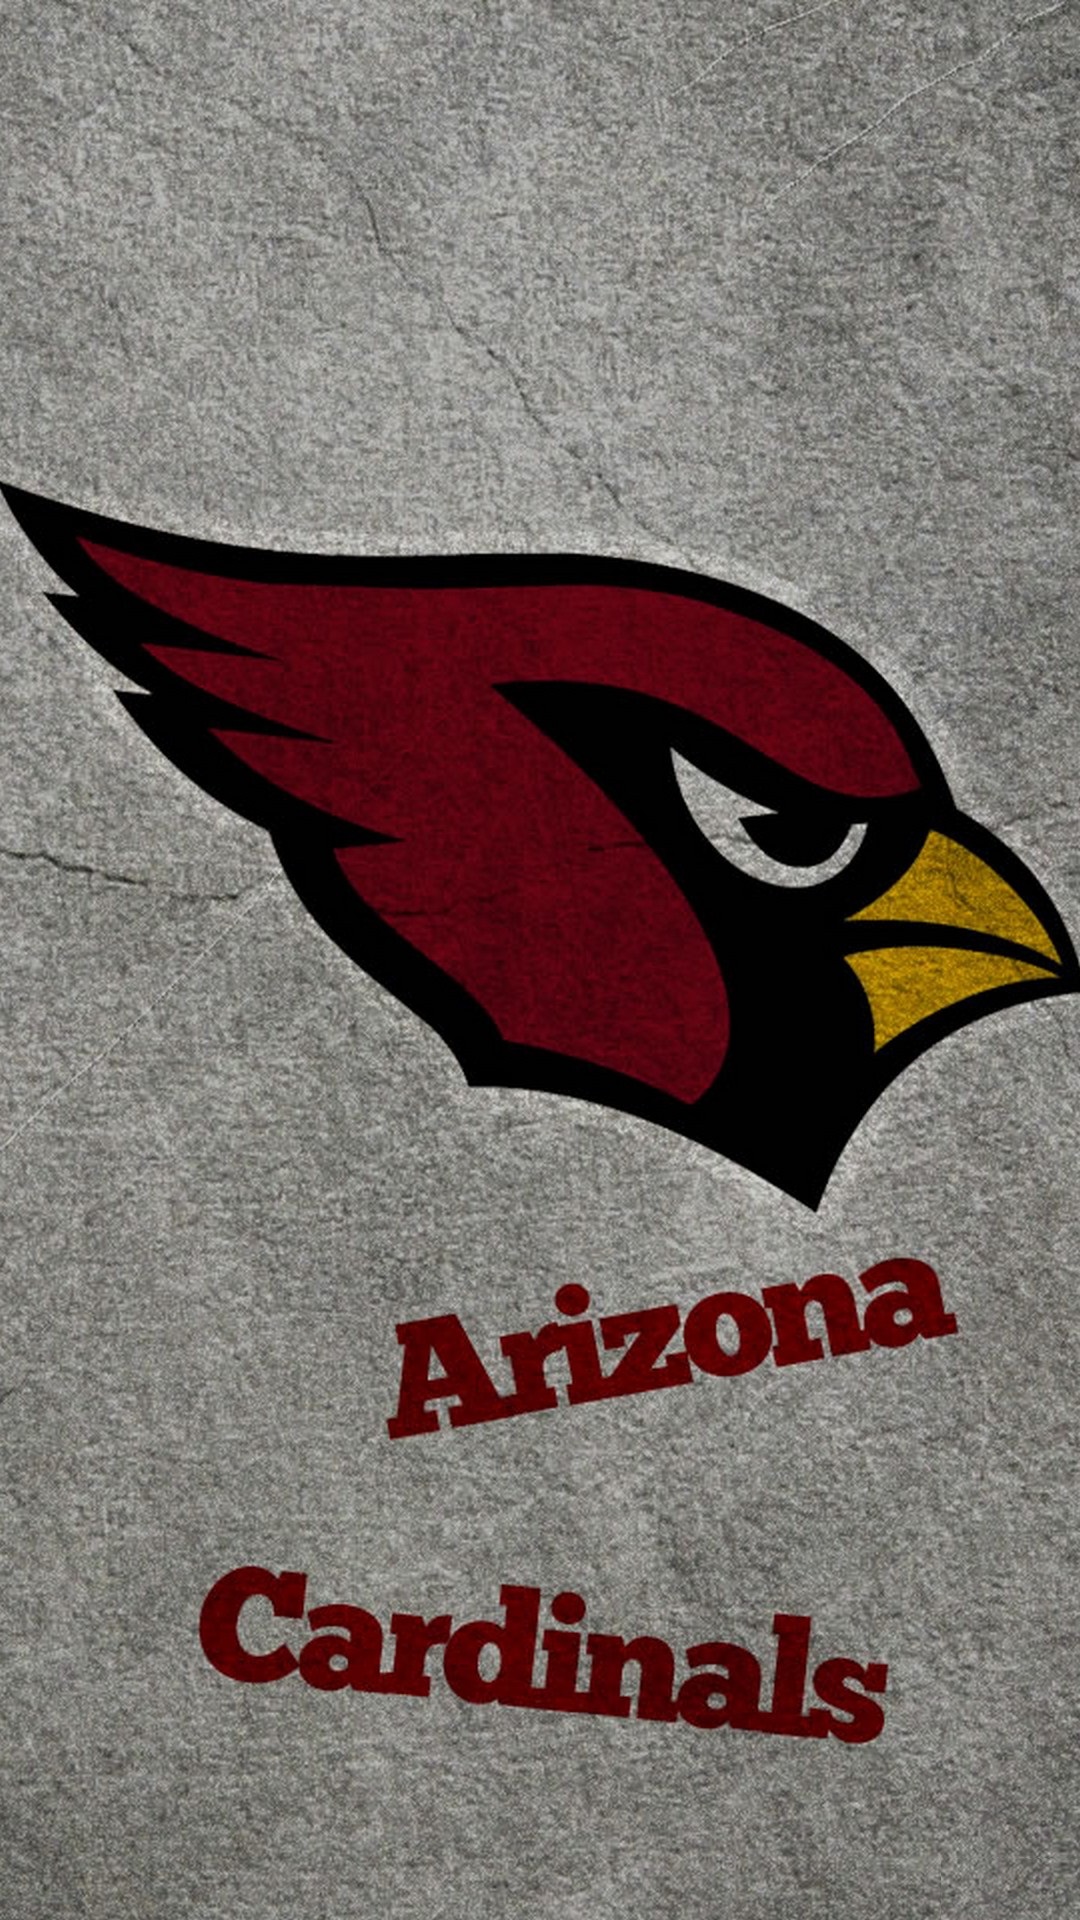 Arizona Cardinals iPhone XR Wallpaper With high-resolution 1080X1920 pixel. Download and set as wallpaper for Apple iPhone X, XS Max, XR, 8, 7, 6, SE, iPad, Android